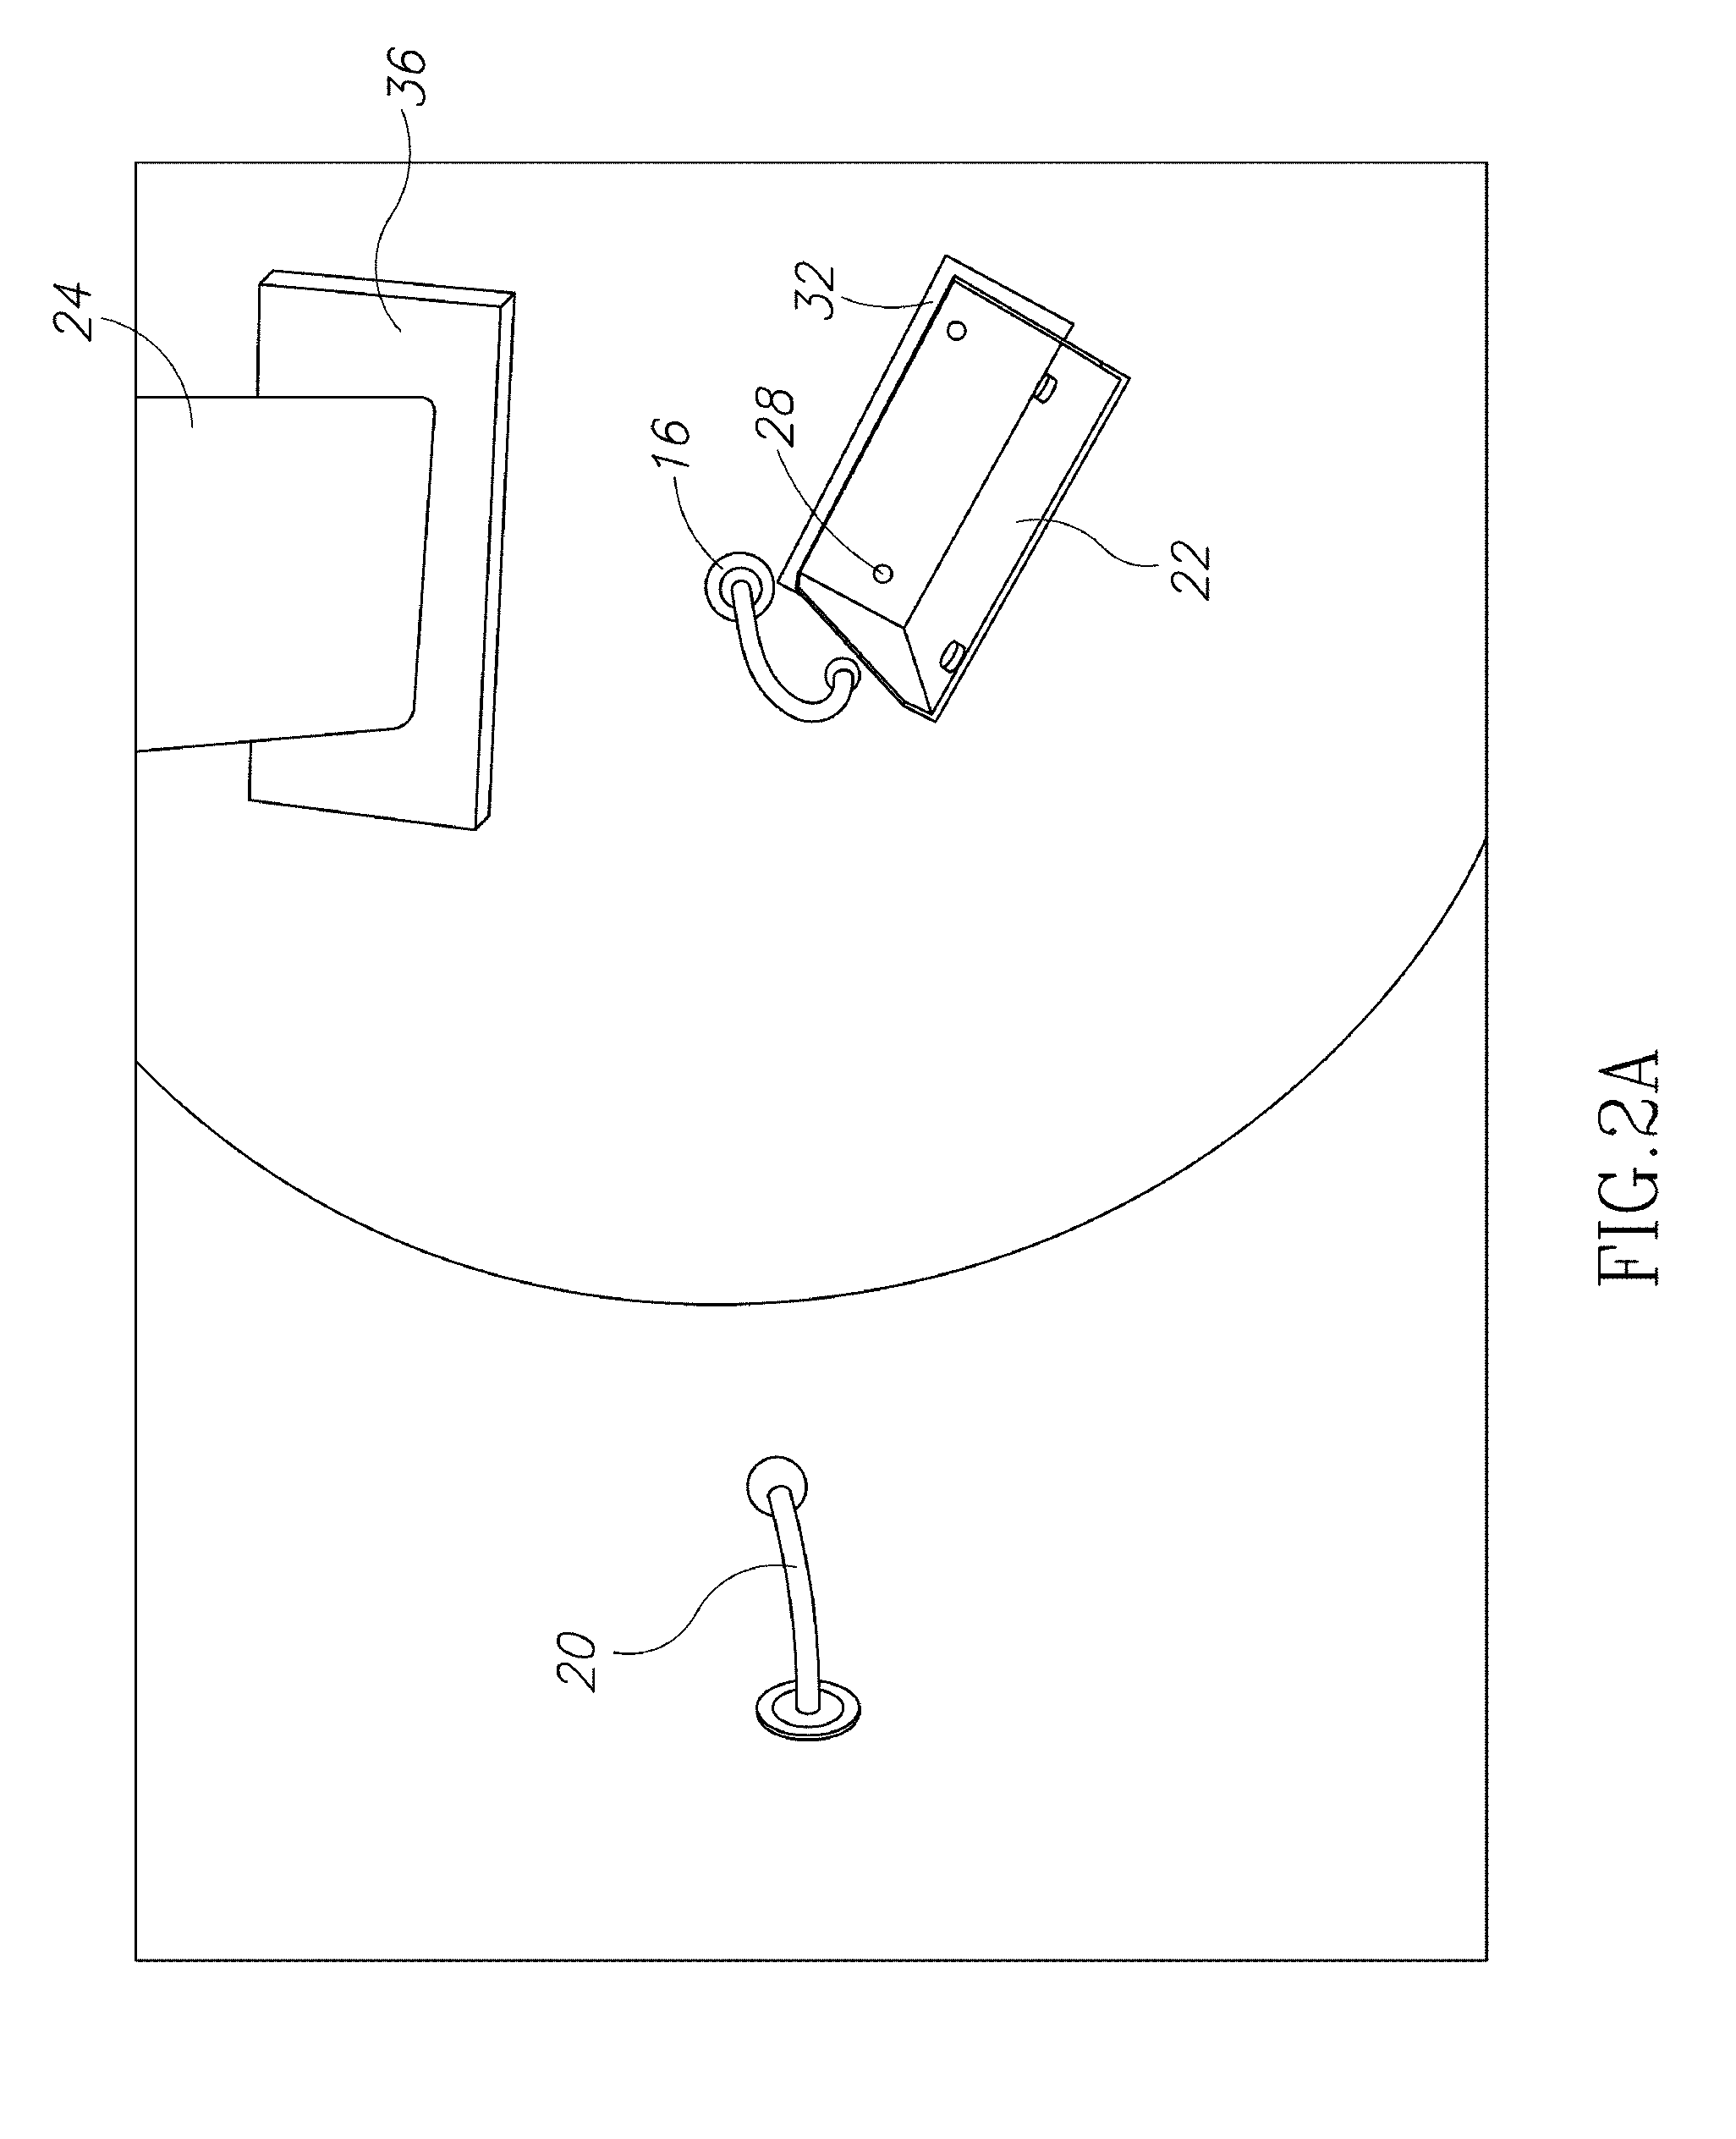 Drying apparatus and methods and accessories for use therewith